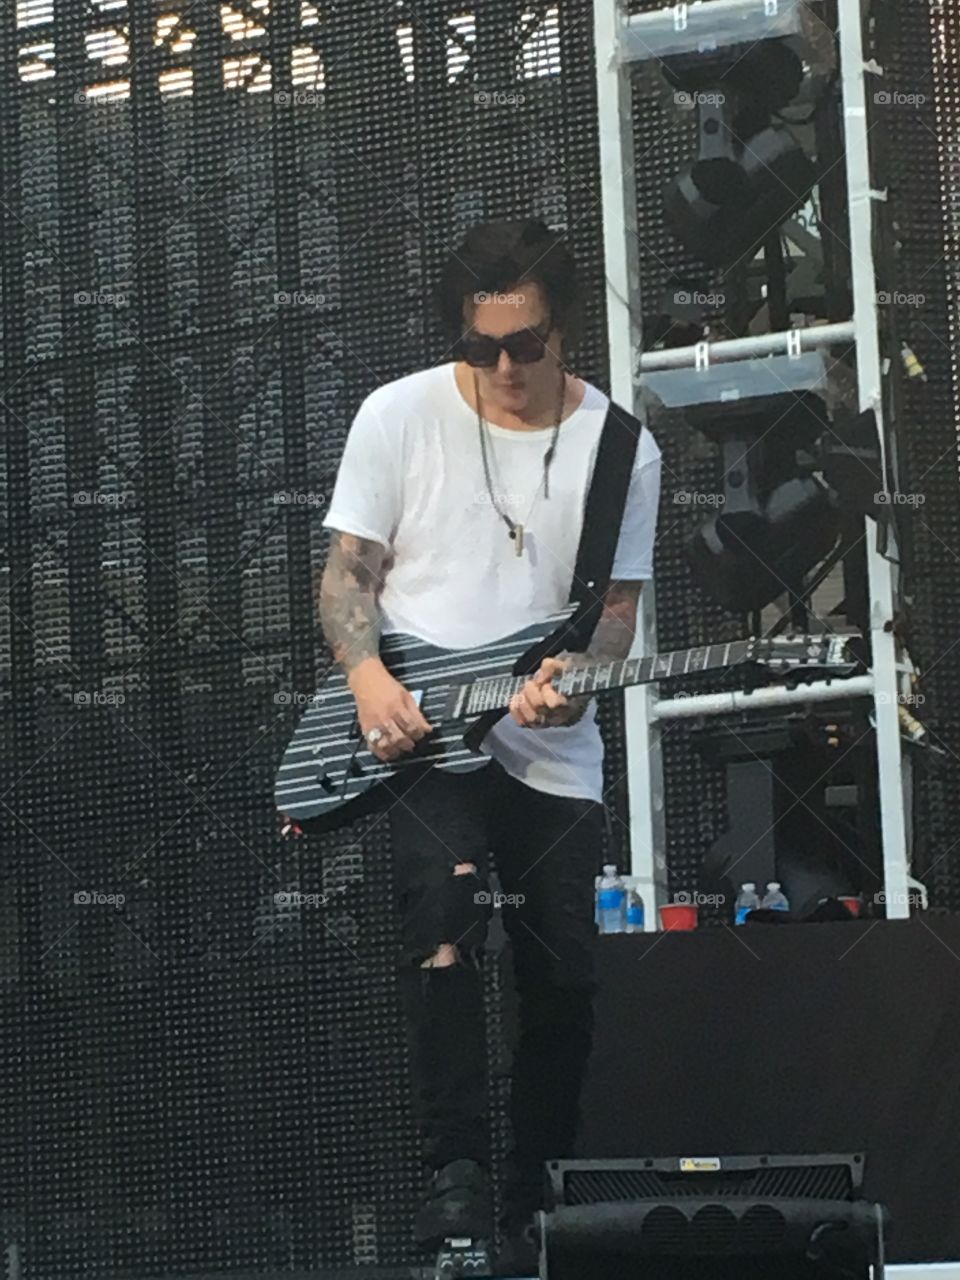 Synyster Gates of Avenged Sevenfold